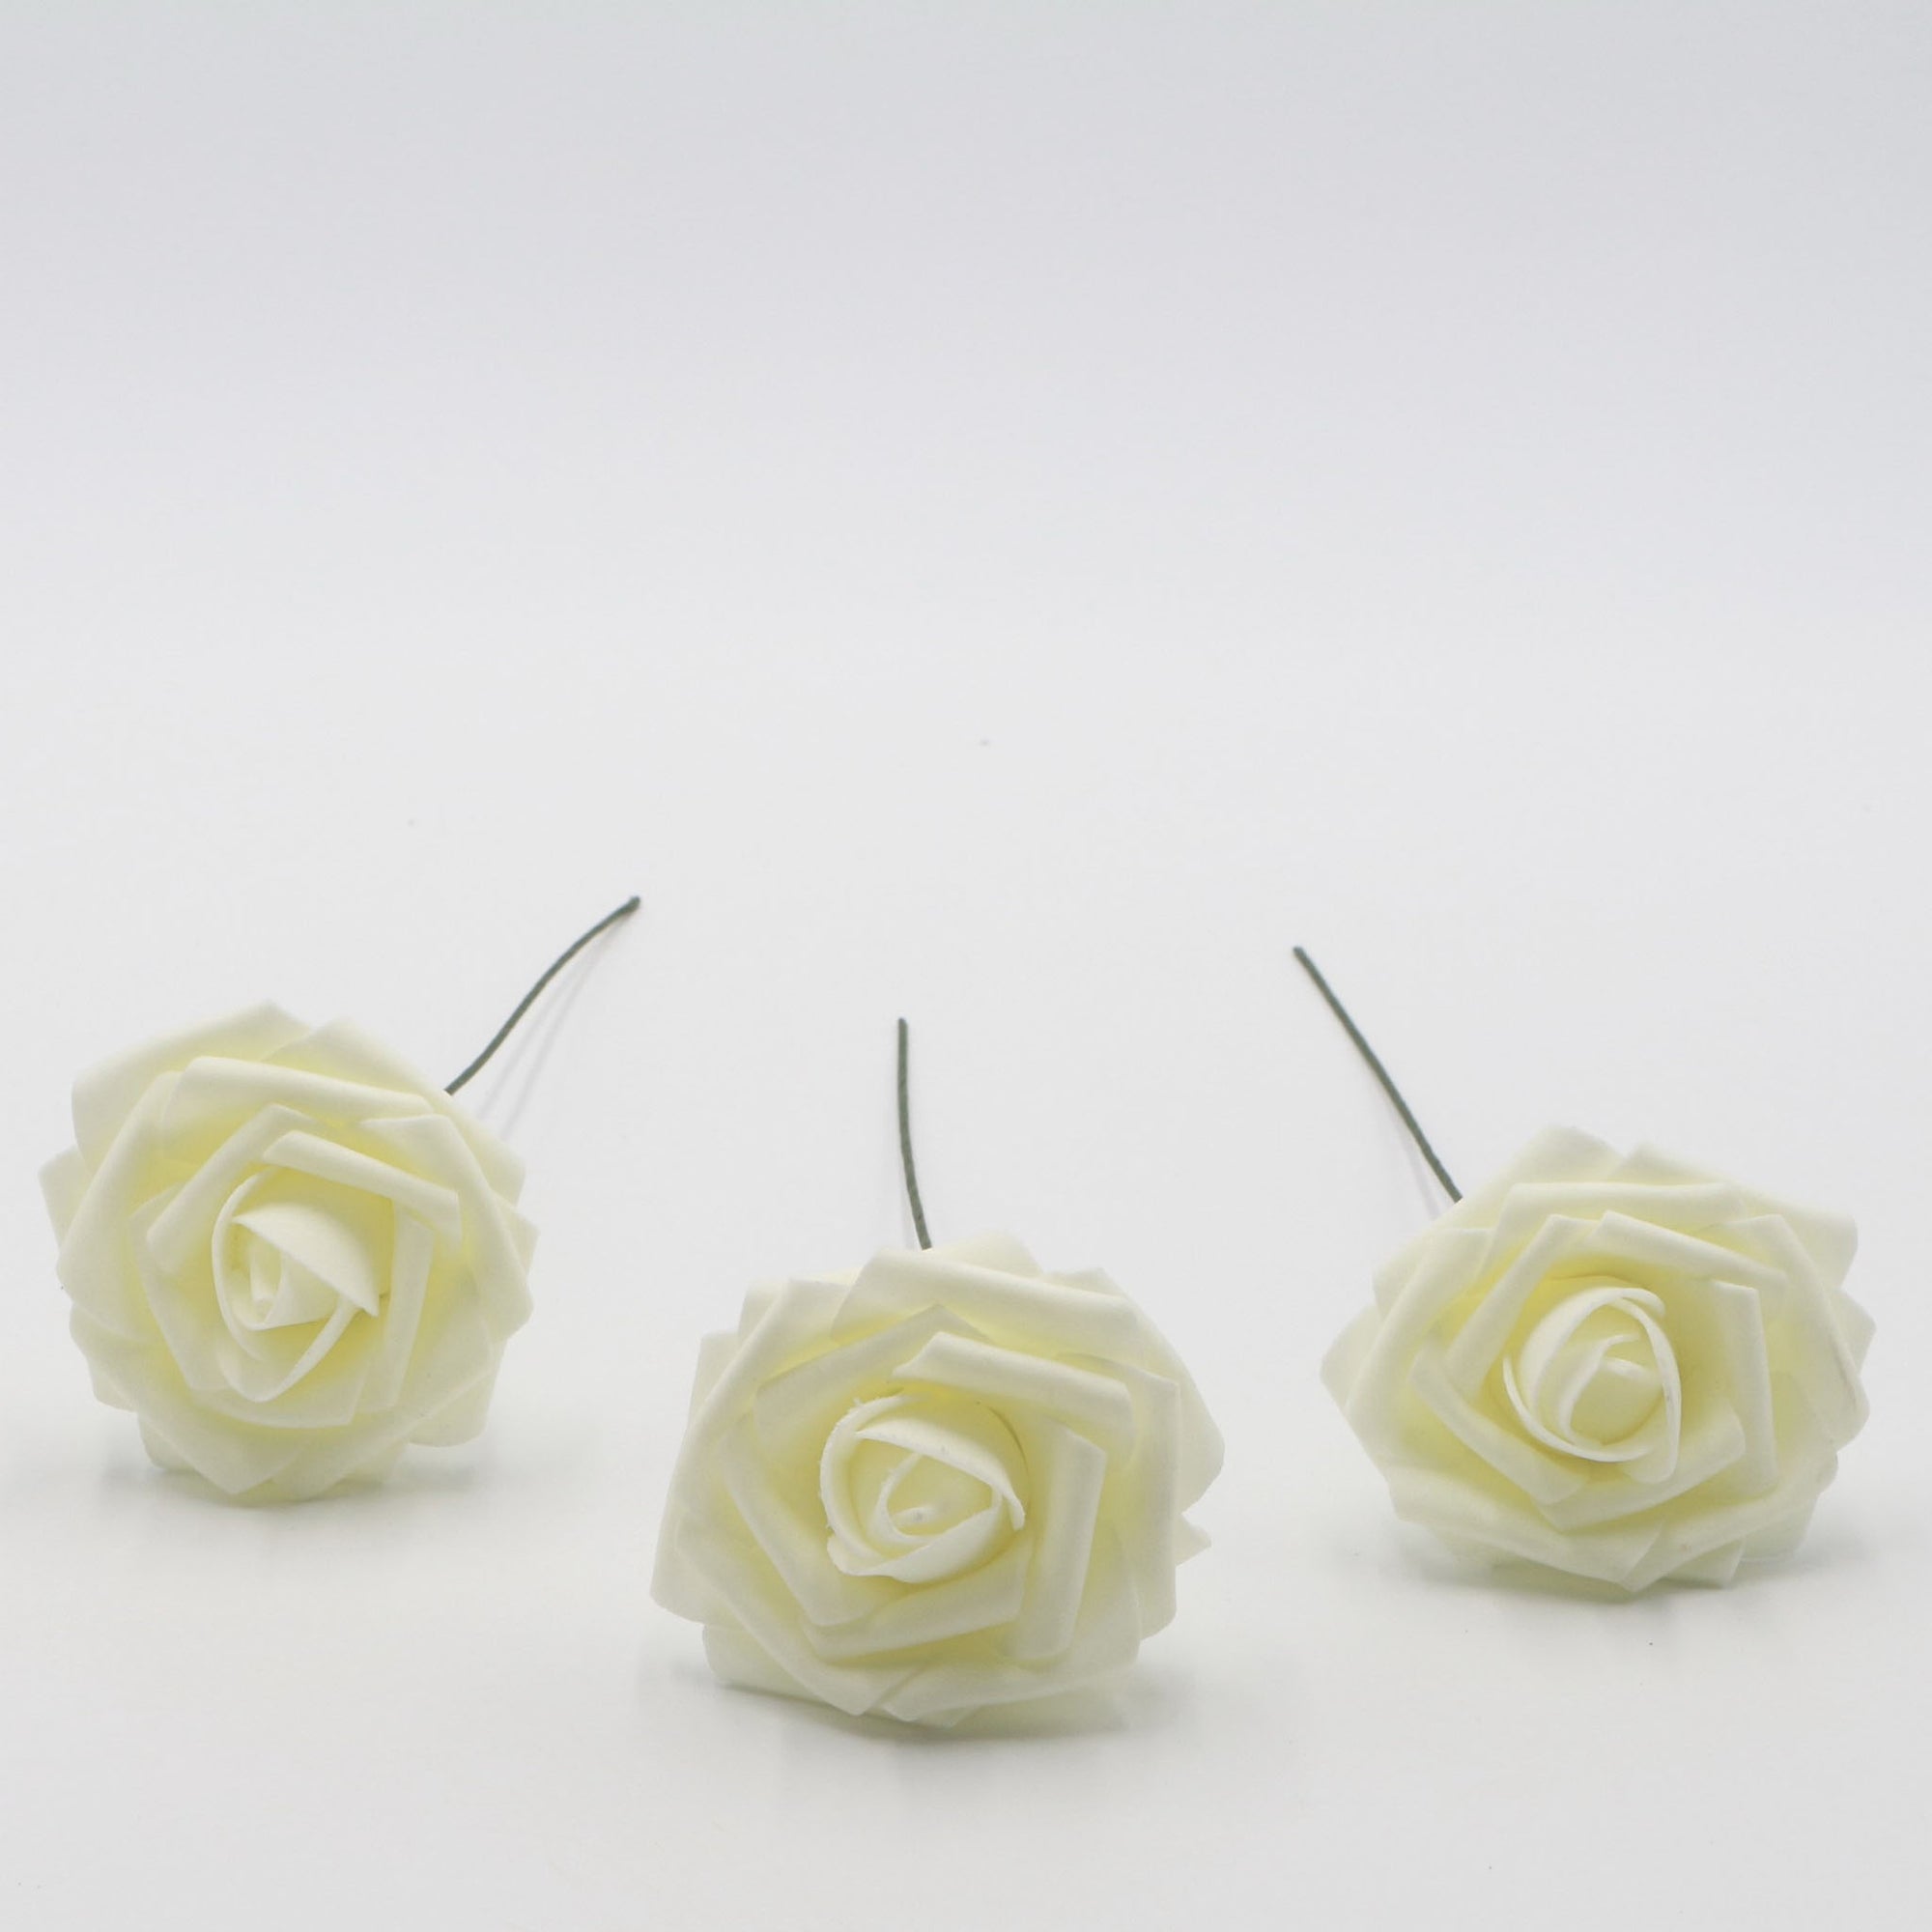 Ivory Roses Faux Flowers Wedding Floral Supplies